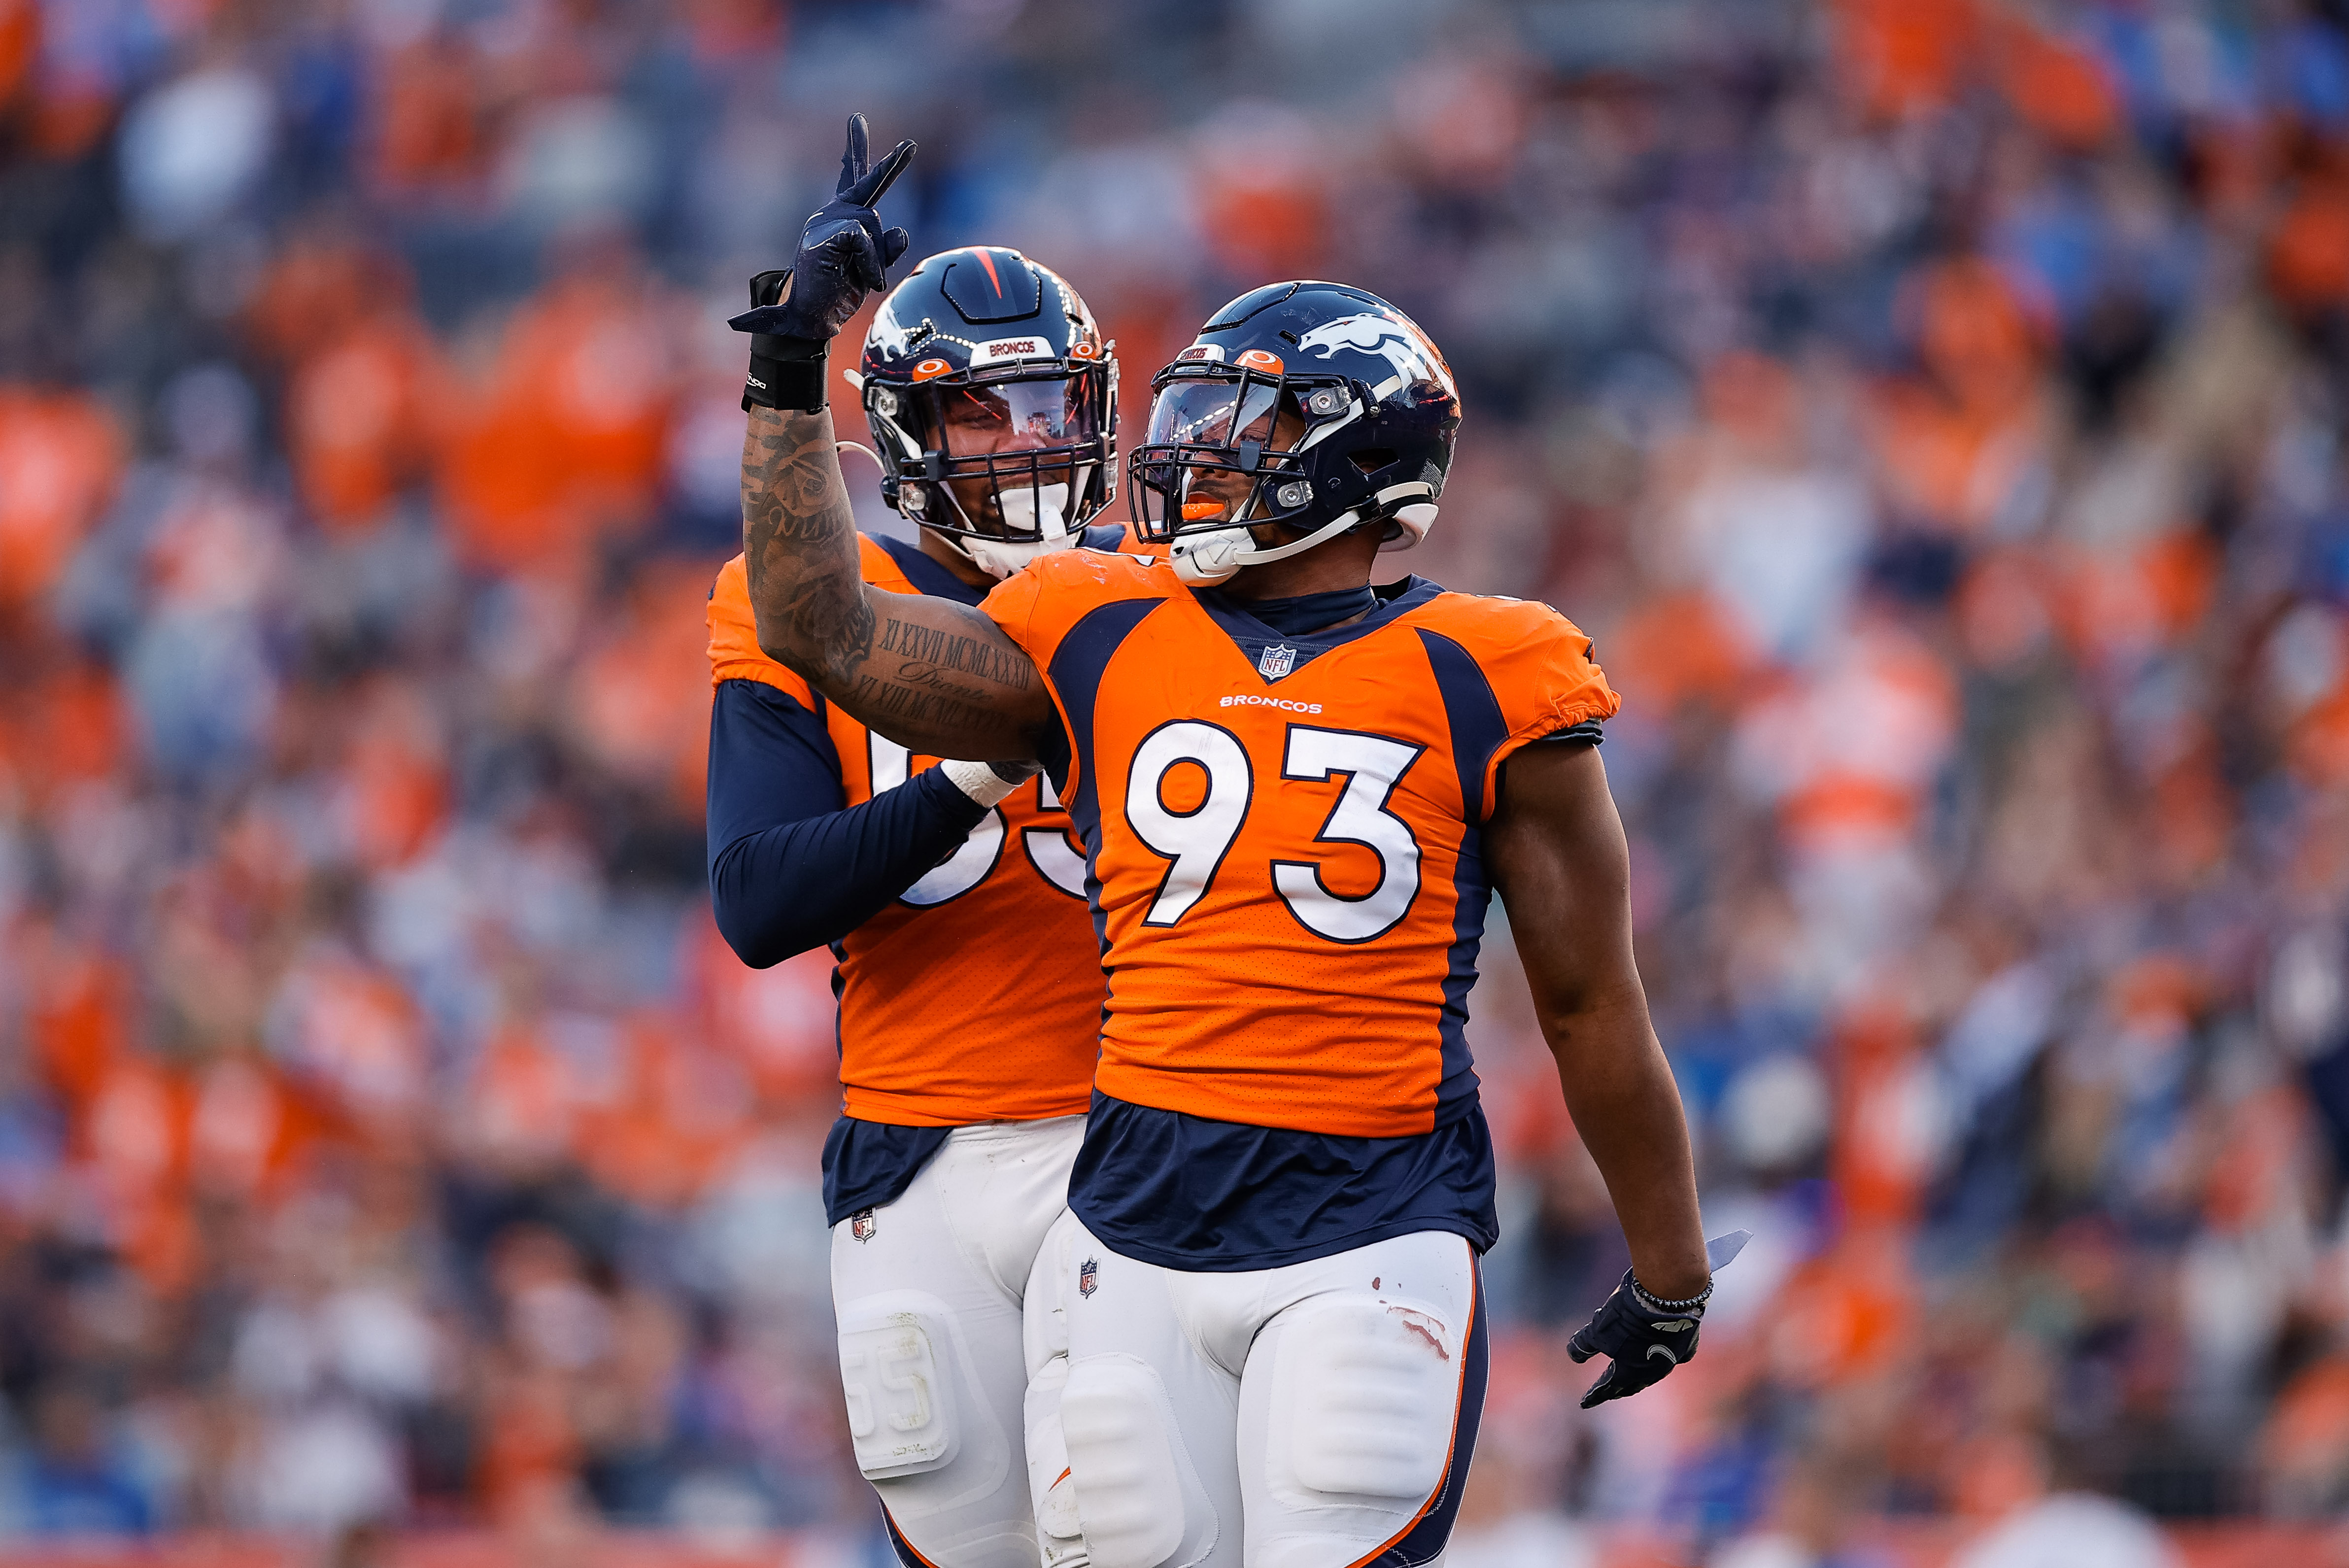 (DreMont Jones) Denver Broncos defensive end Dre'Mont Jones (93) celebrates with linebacker Bradley Chubb (55) after a play in the third quarter against the Detroit Lions at Empower Field at Mile High.